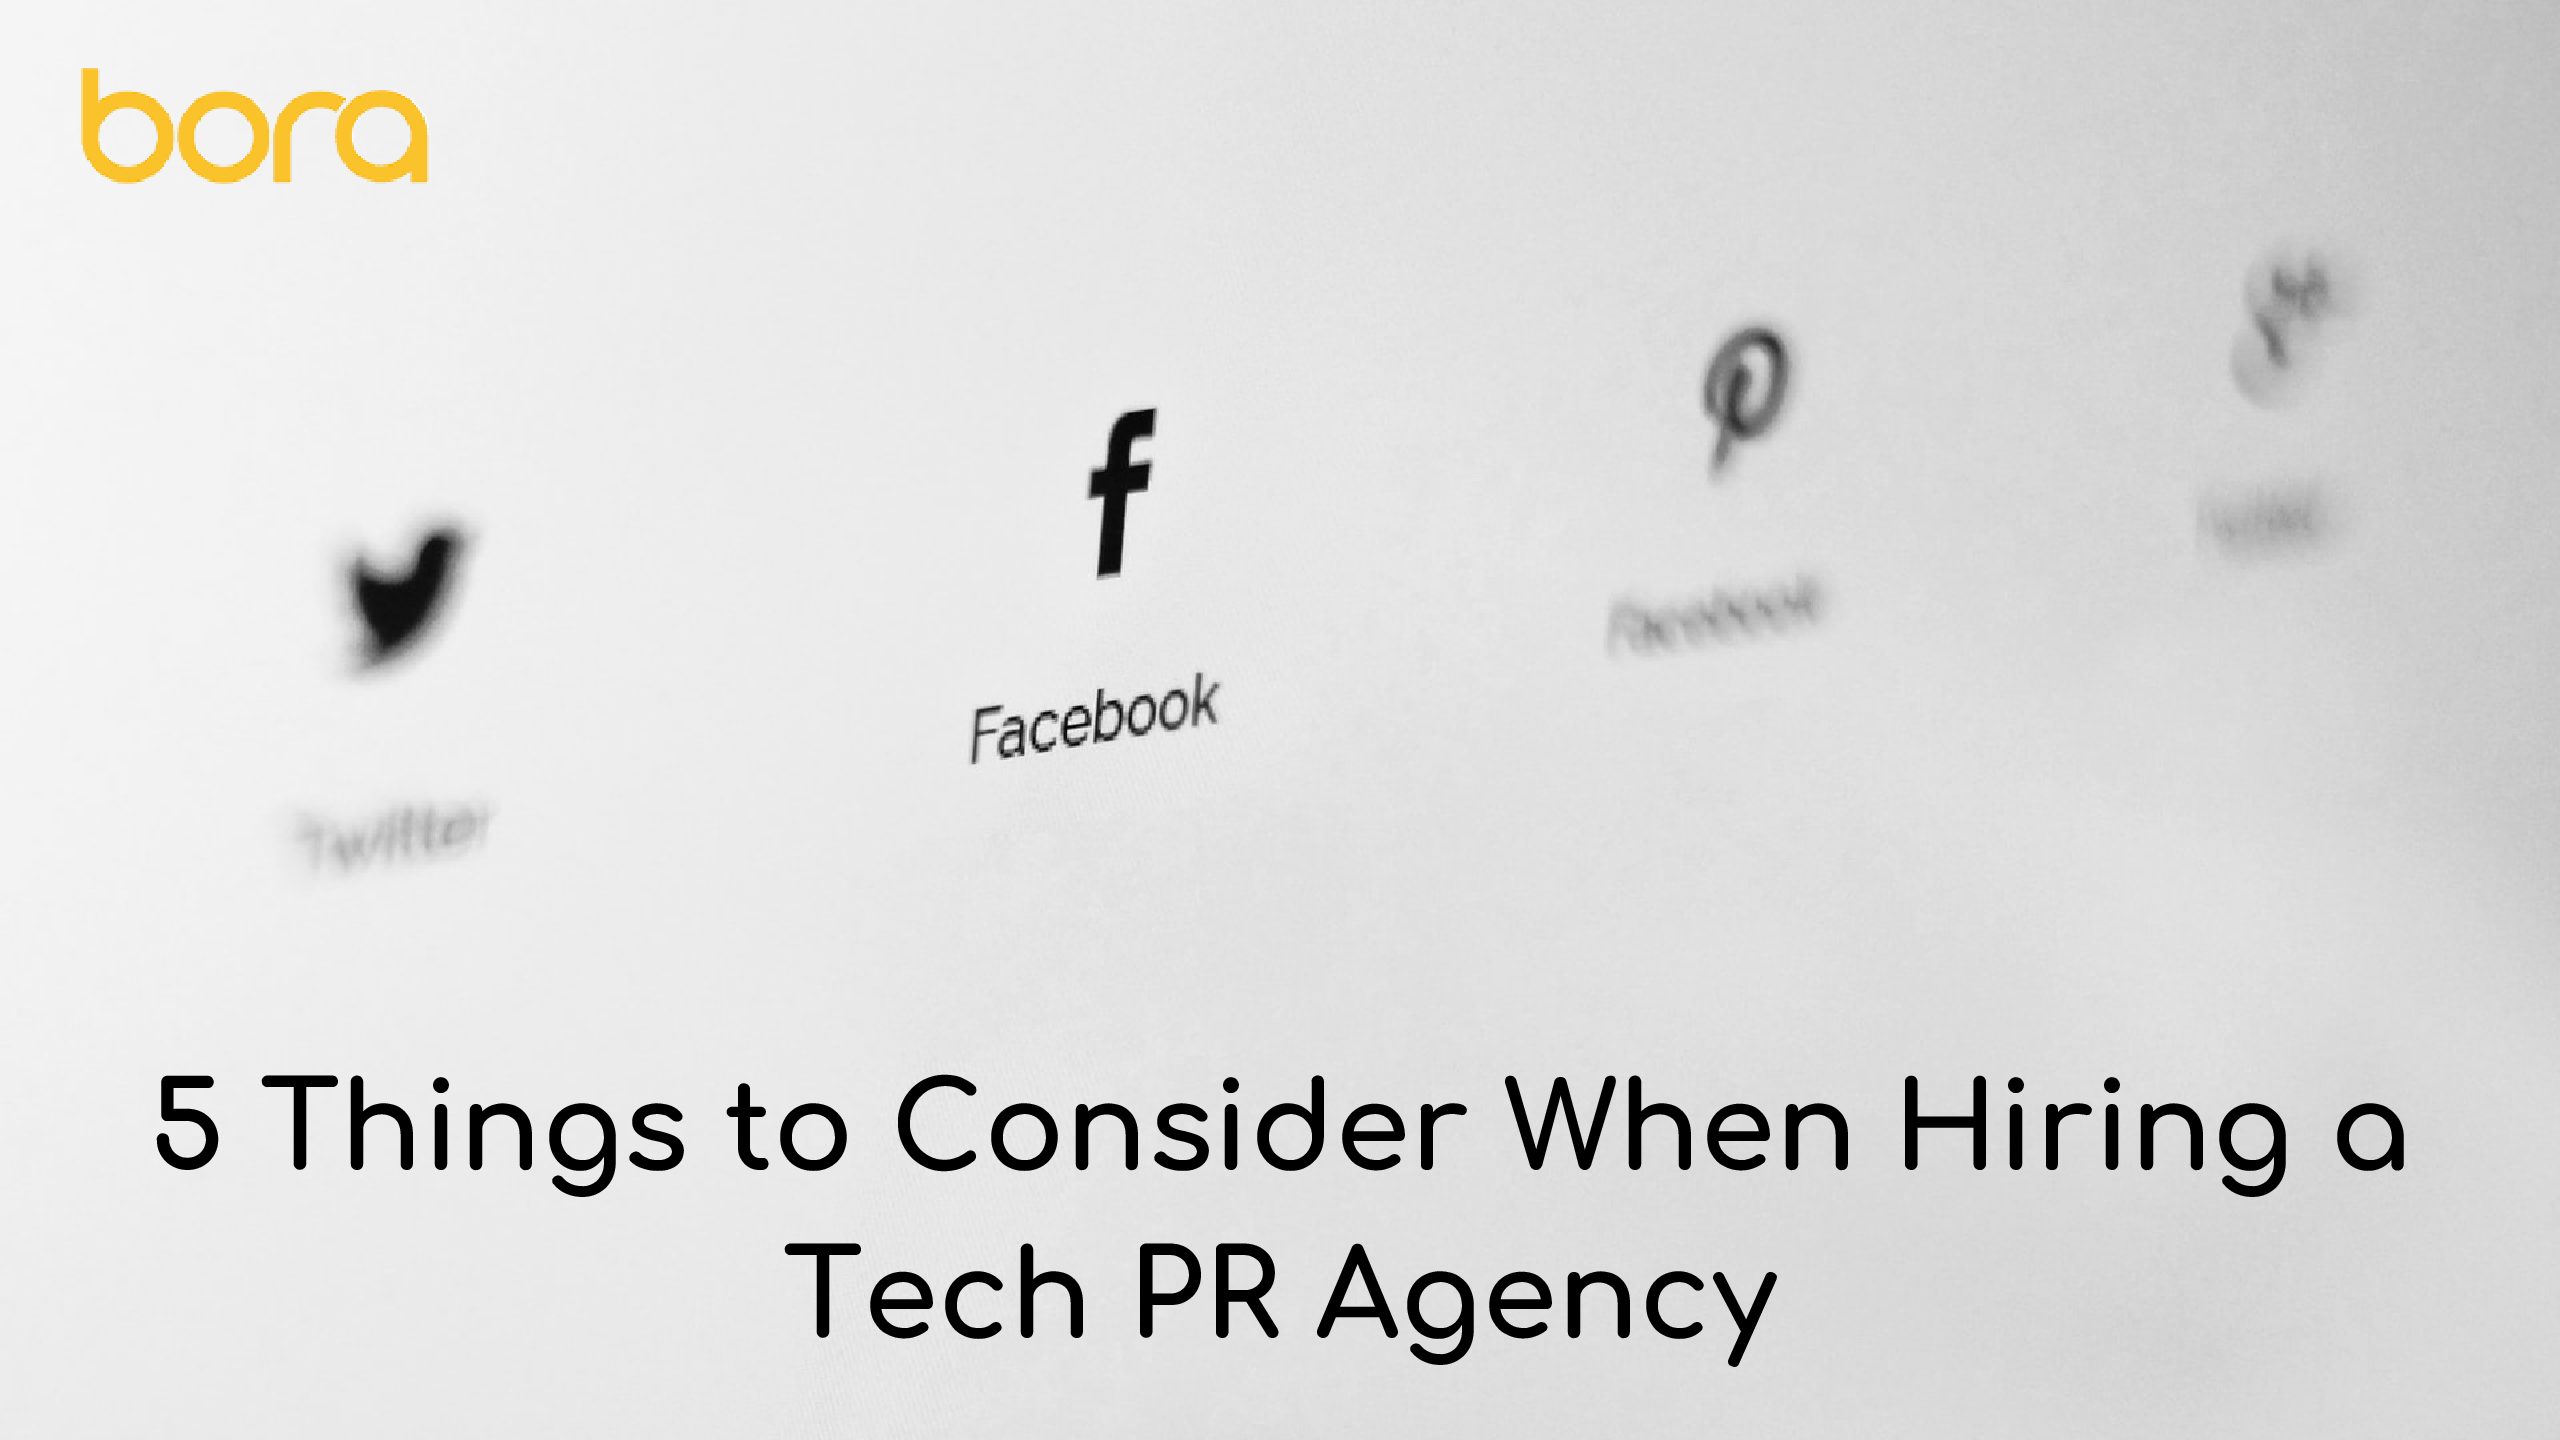 Five Things to Consider When Hiring a Tech PR Agency